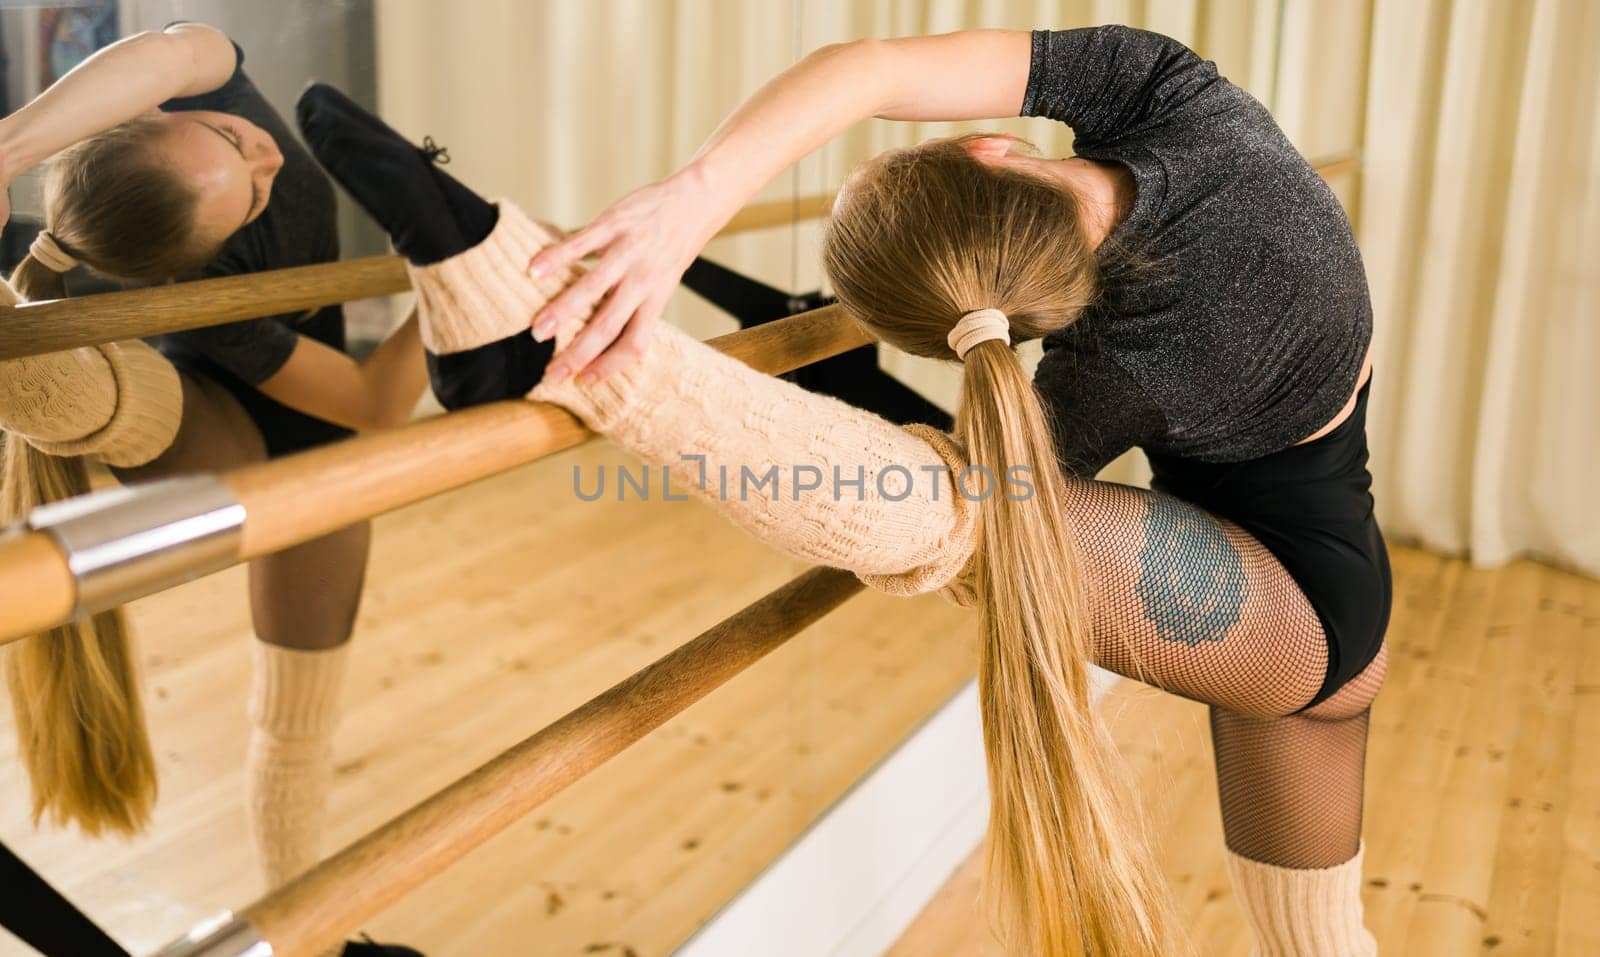 Young woman ballerina stretching and training at barre in dance studio - ballet and dancer concept by Satura86